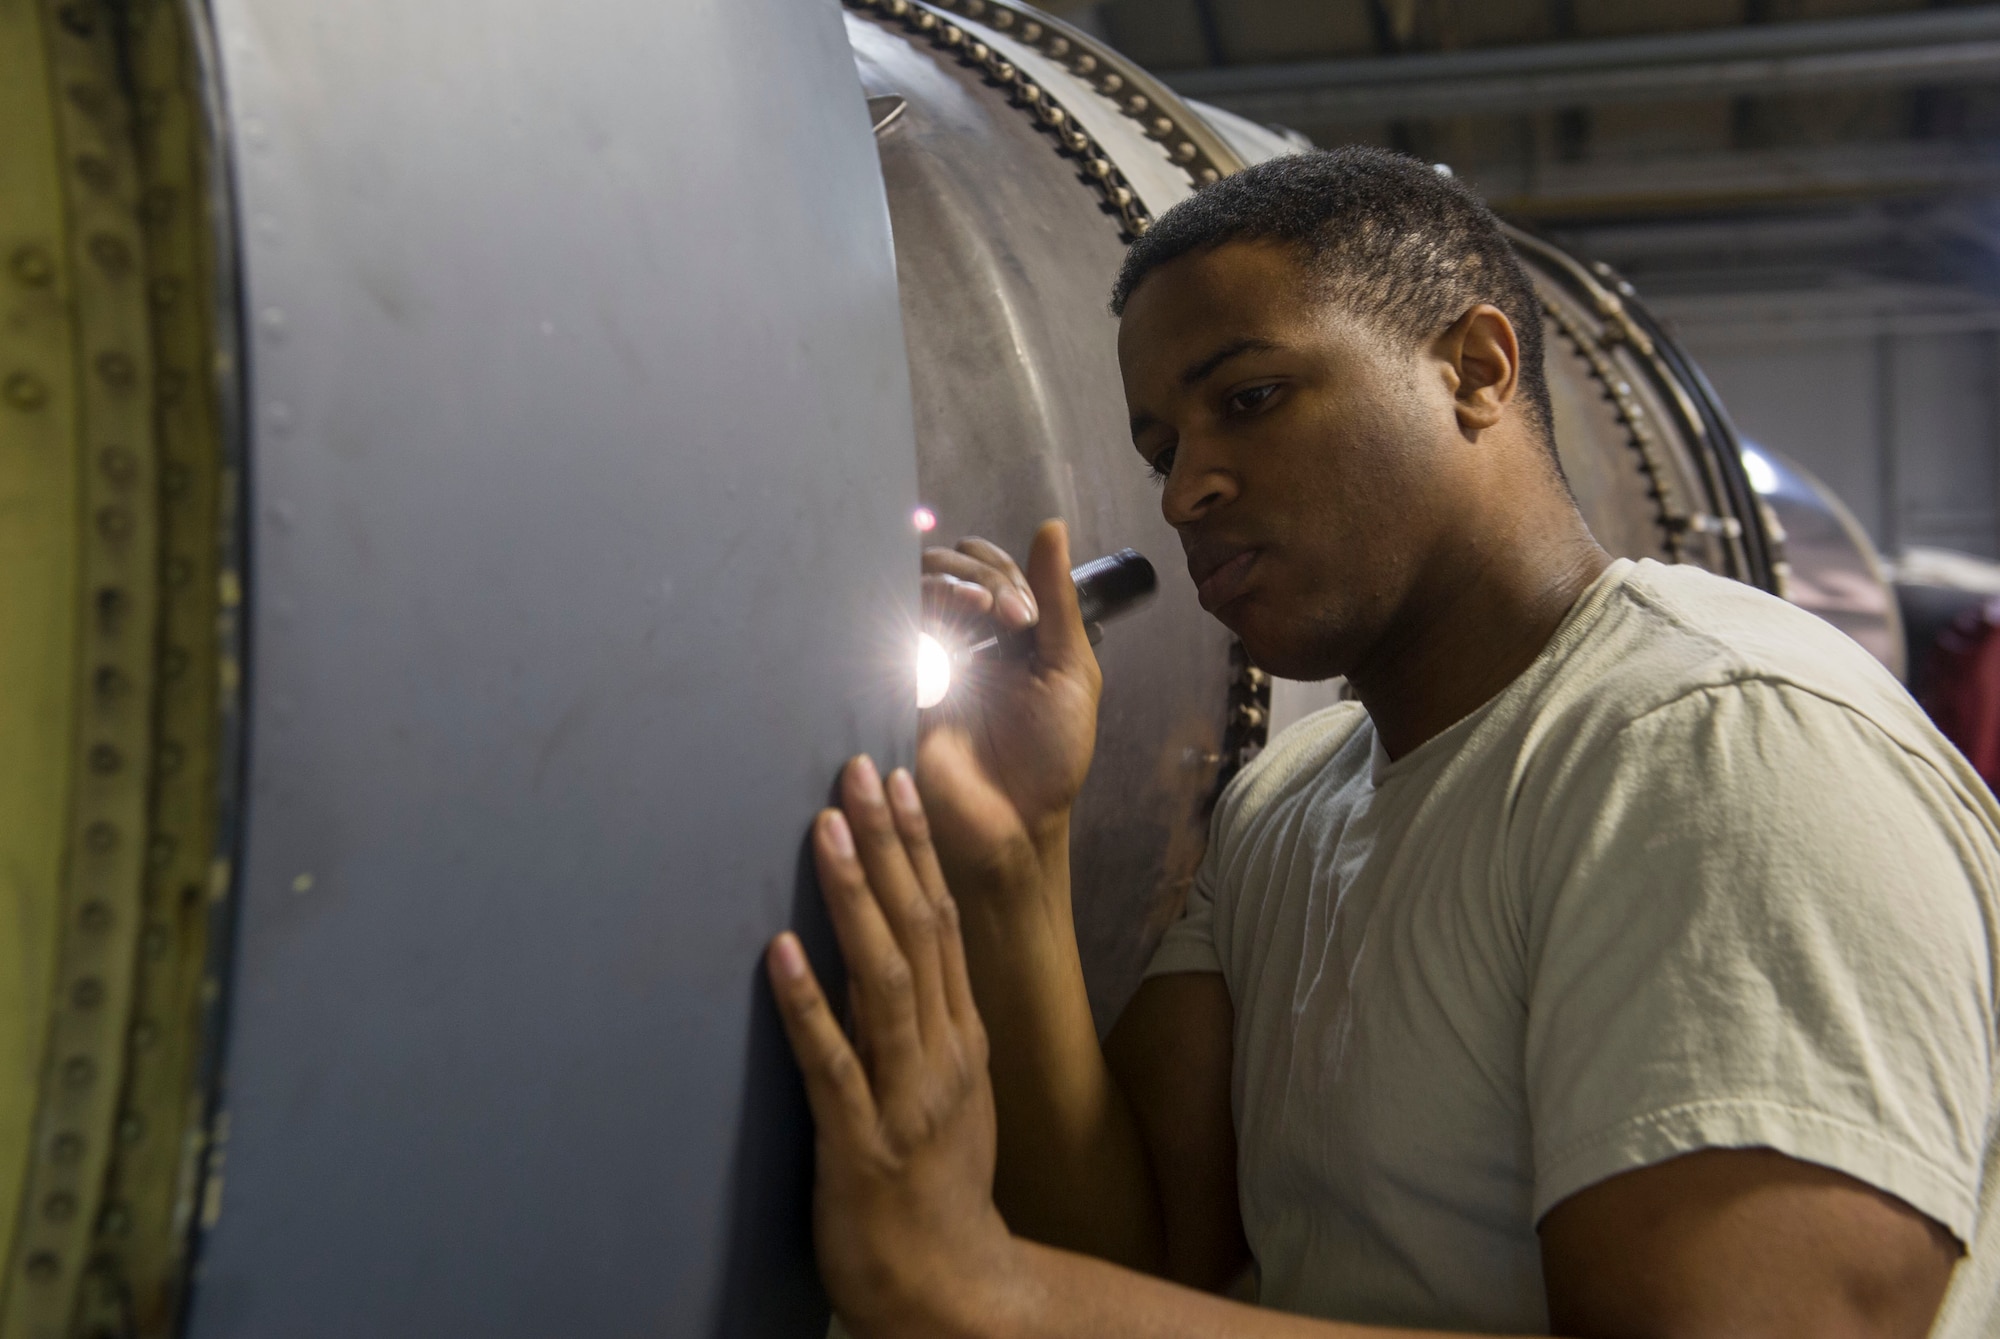 Staff Sgt. Korie Parker, 5th Maintenance Group engine trending and diagnostic monitor, inspects a B-52 combine engine at Minot Air Force Base, N.D., July 5, 2016. ET&D monitors are responsible for the 5th Bomb wing’s 228 TF-33 engine fleet. (U.S. Air Force photo/Senior Airman Apryl Hall)